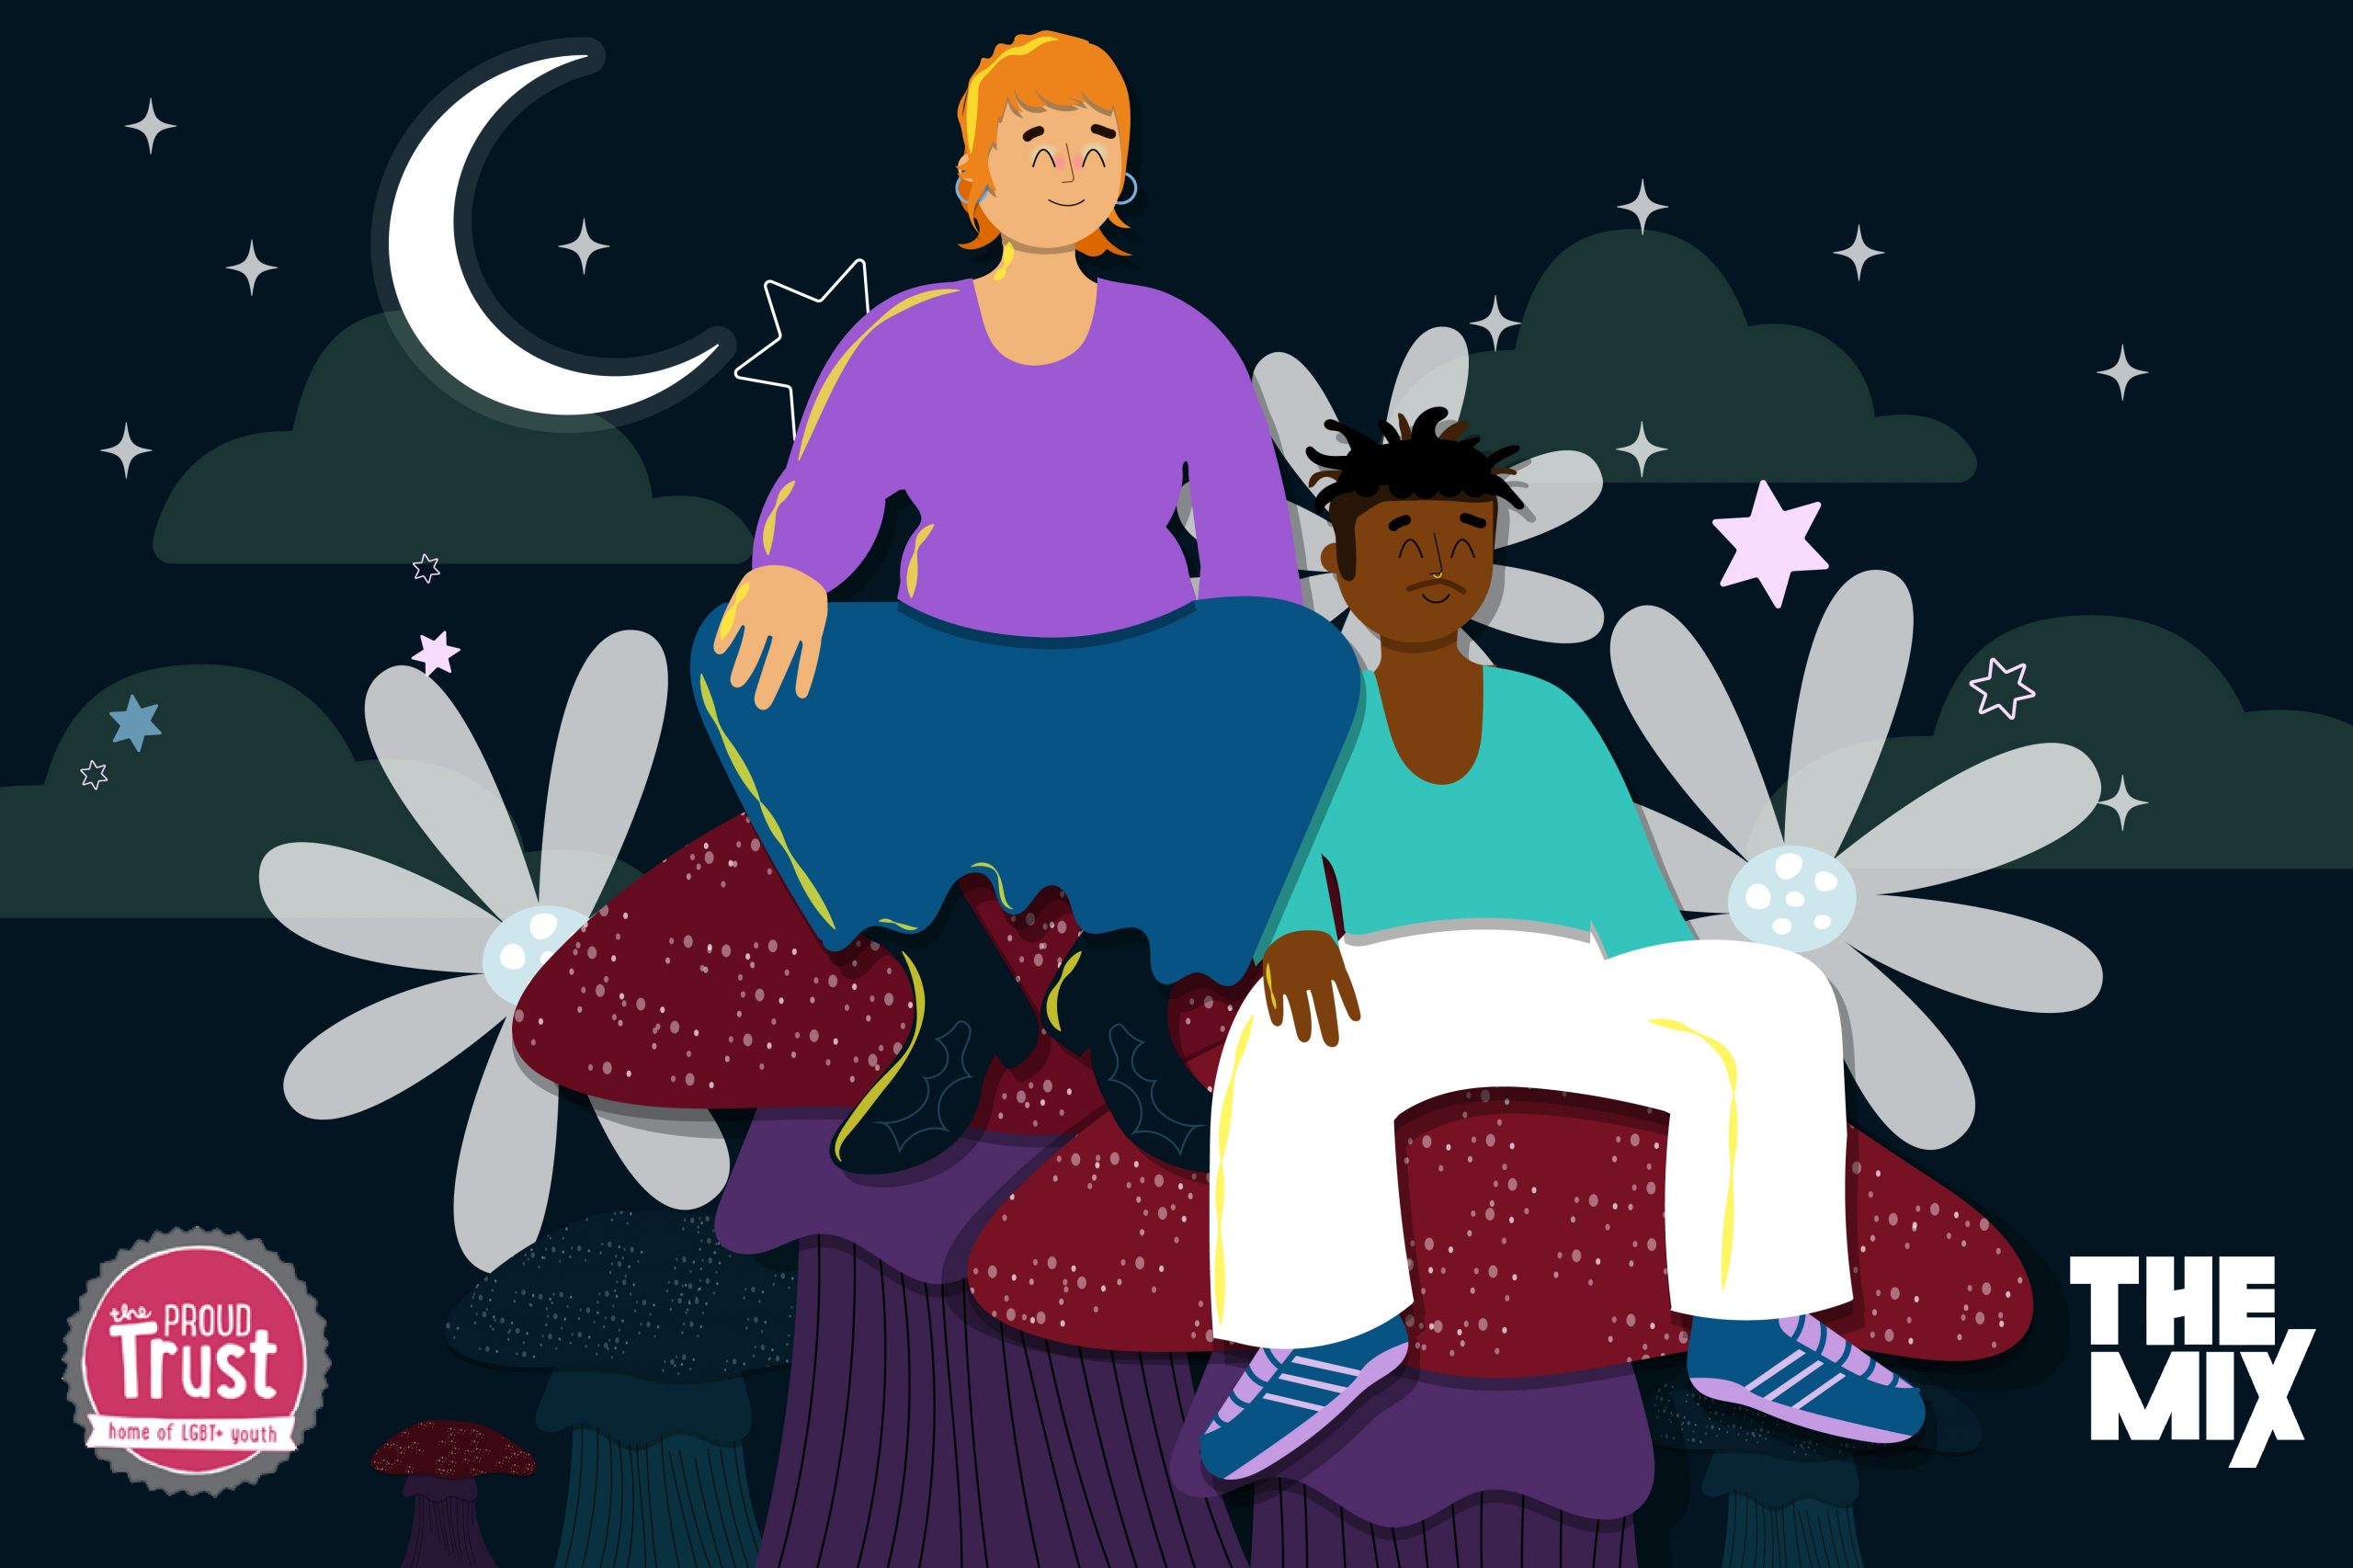 Graphic shows two young people sitting on giant mushrooms. In the background is a night sky with a moon and stars, to represent the possibilities of a non-binary identity.